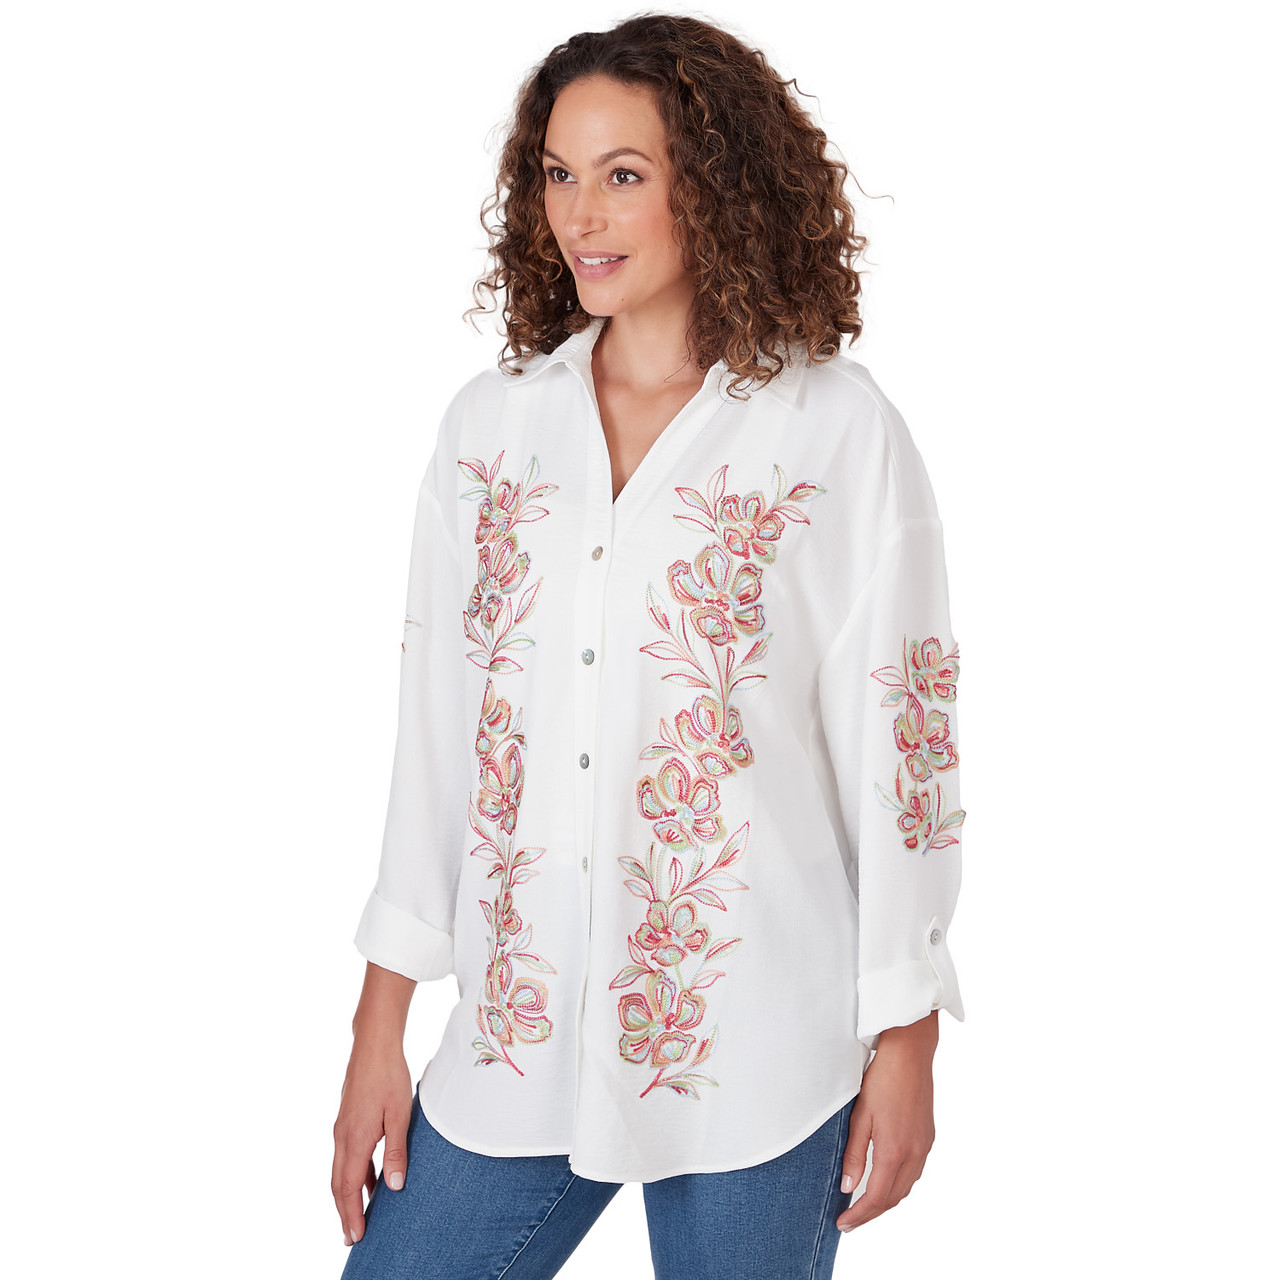 Petite Women's Solid Embroidered Crepe Top